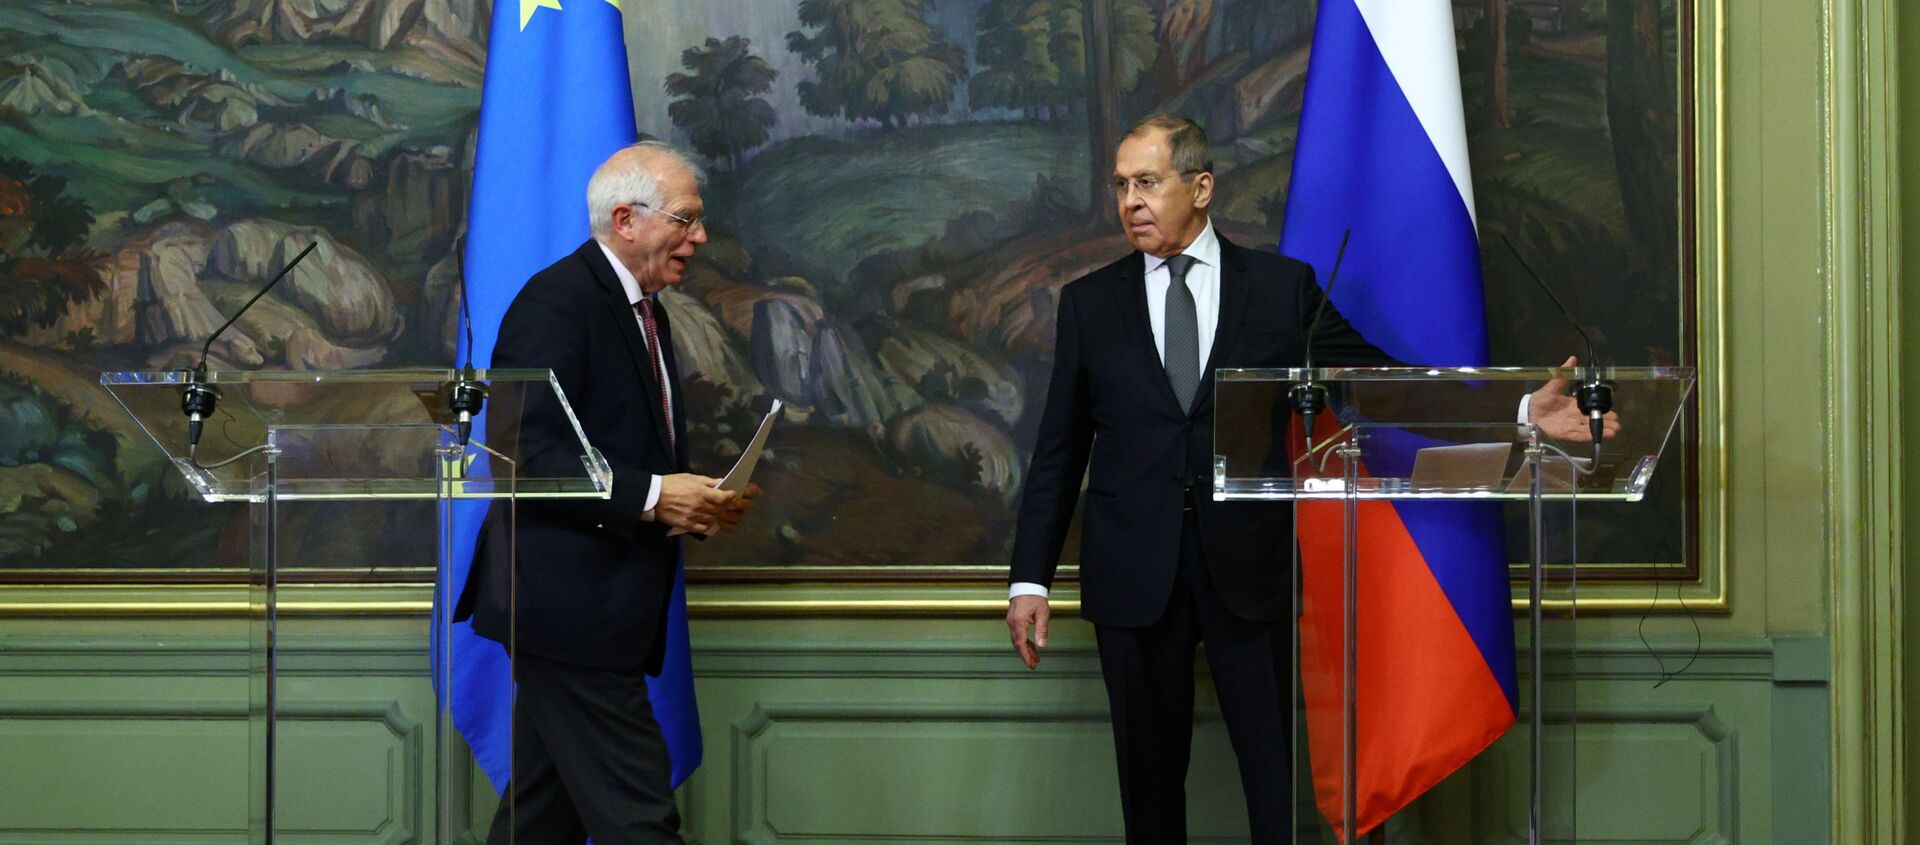 Russia's Foreign Minister Sergei Lavrov and European Union's foreign policy chief Josep Borrell attend a news conference following their talks in Moscow, Russia February 5, 2021. - Sputnik International, 1920, 07.02.2021